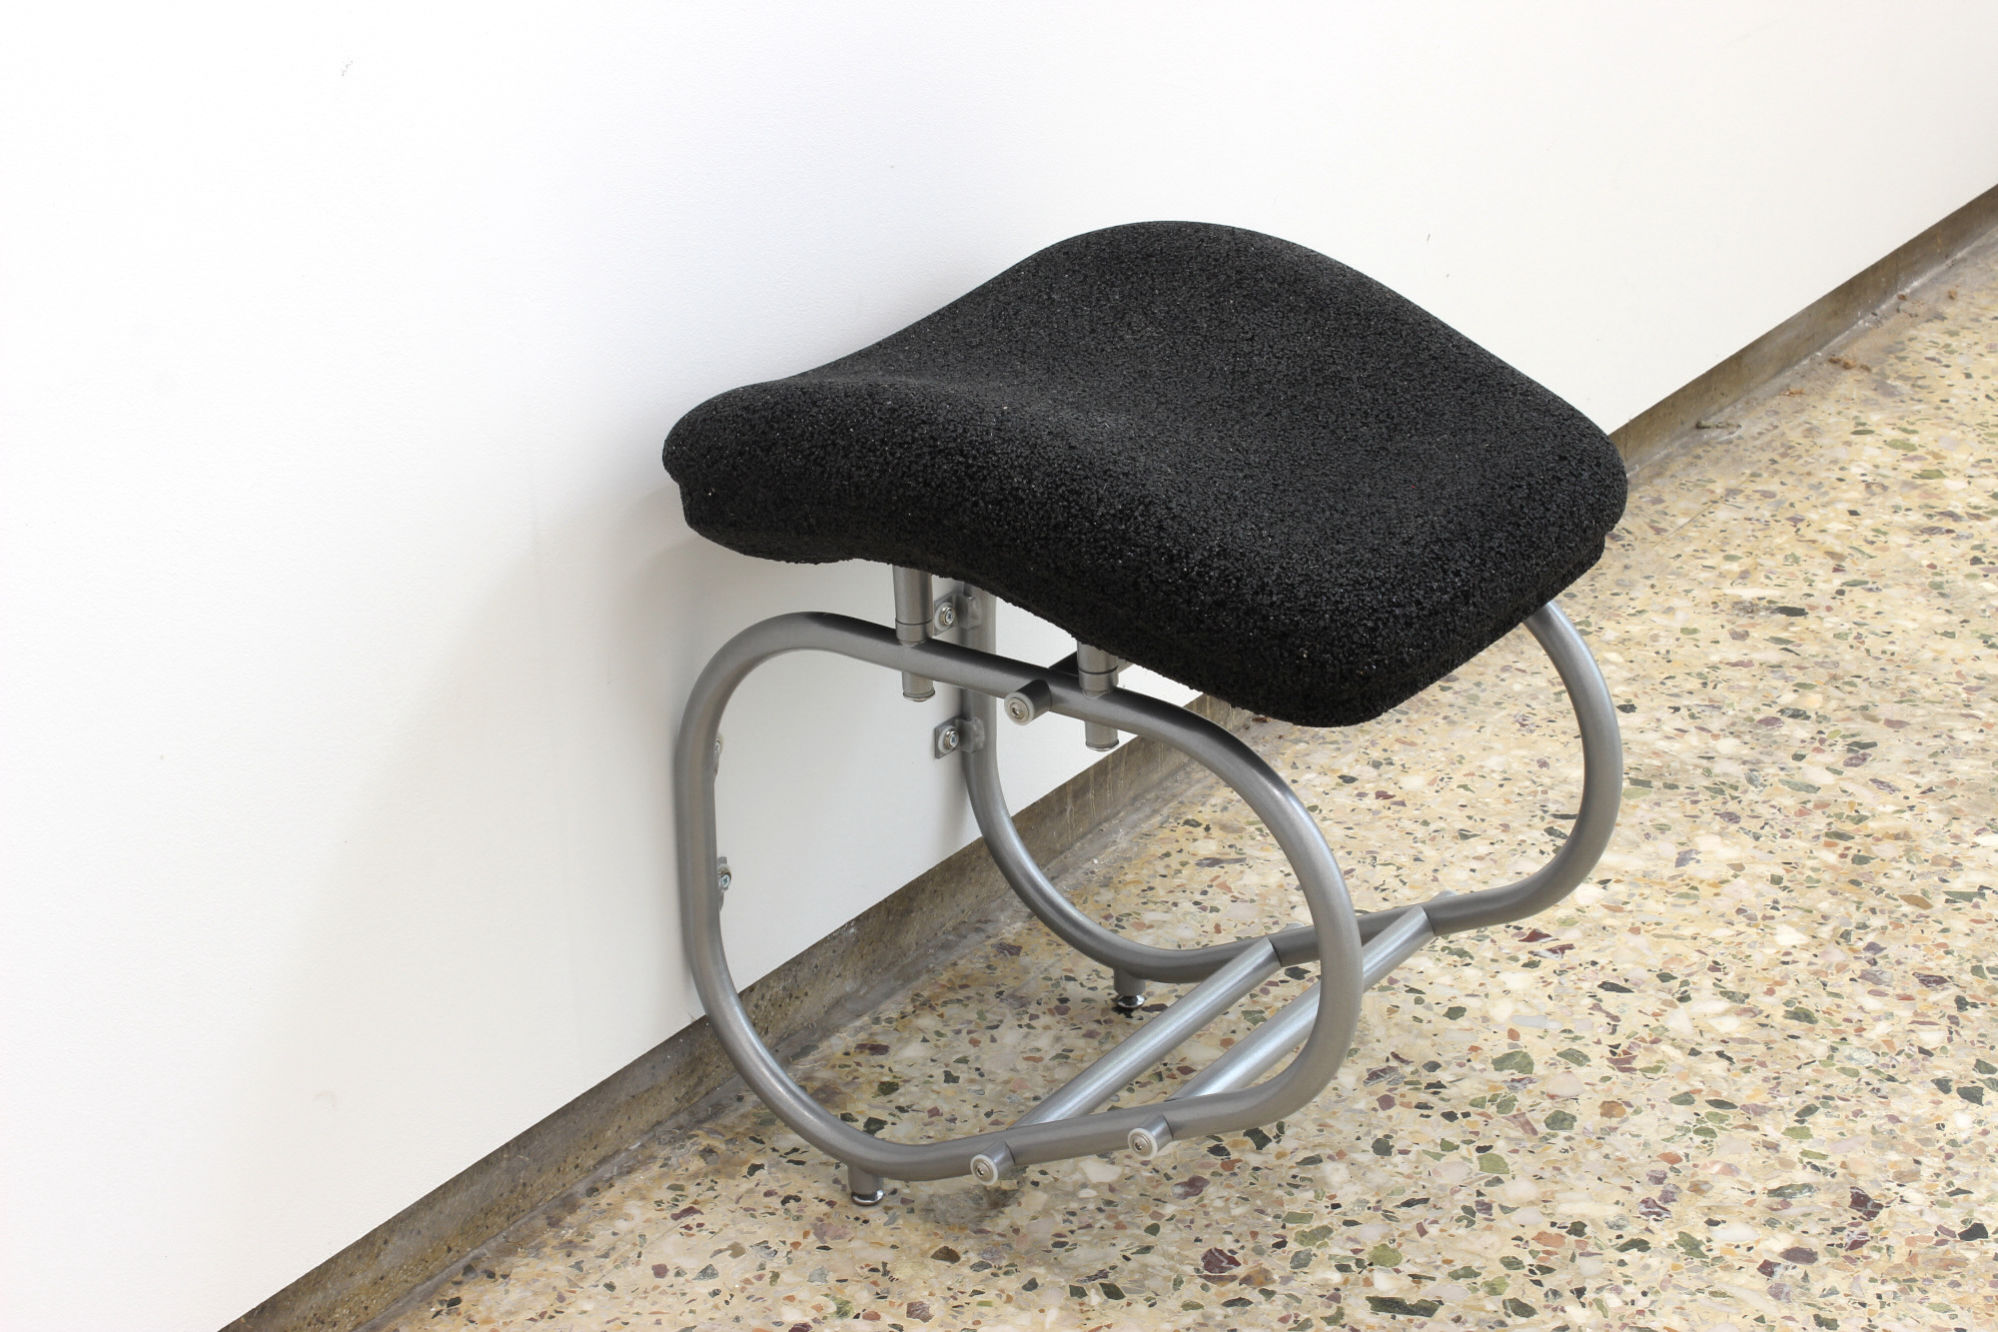 James Fuller - Wall Seat, 2020 - Tyre Chippings, Powder Coated Steel, Reinforced Plaster Polymer - 01